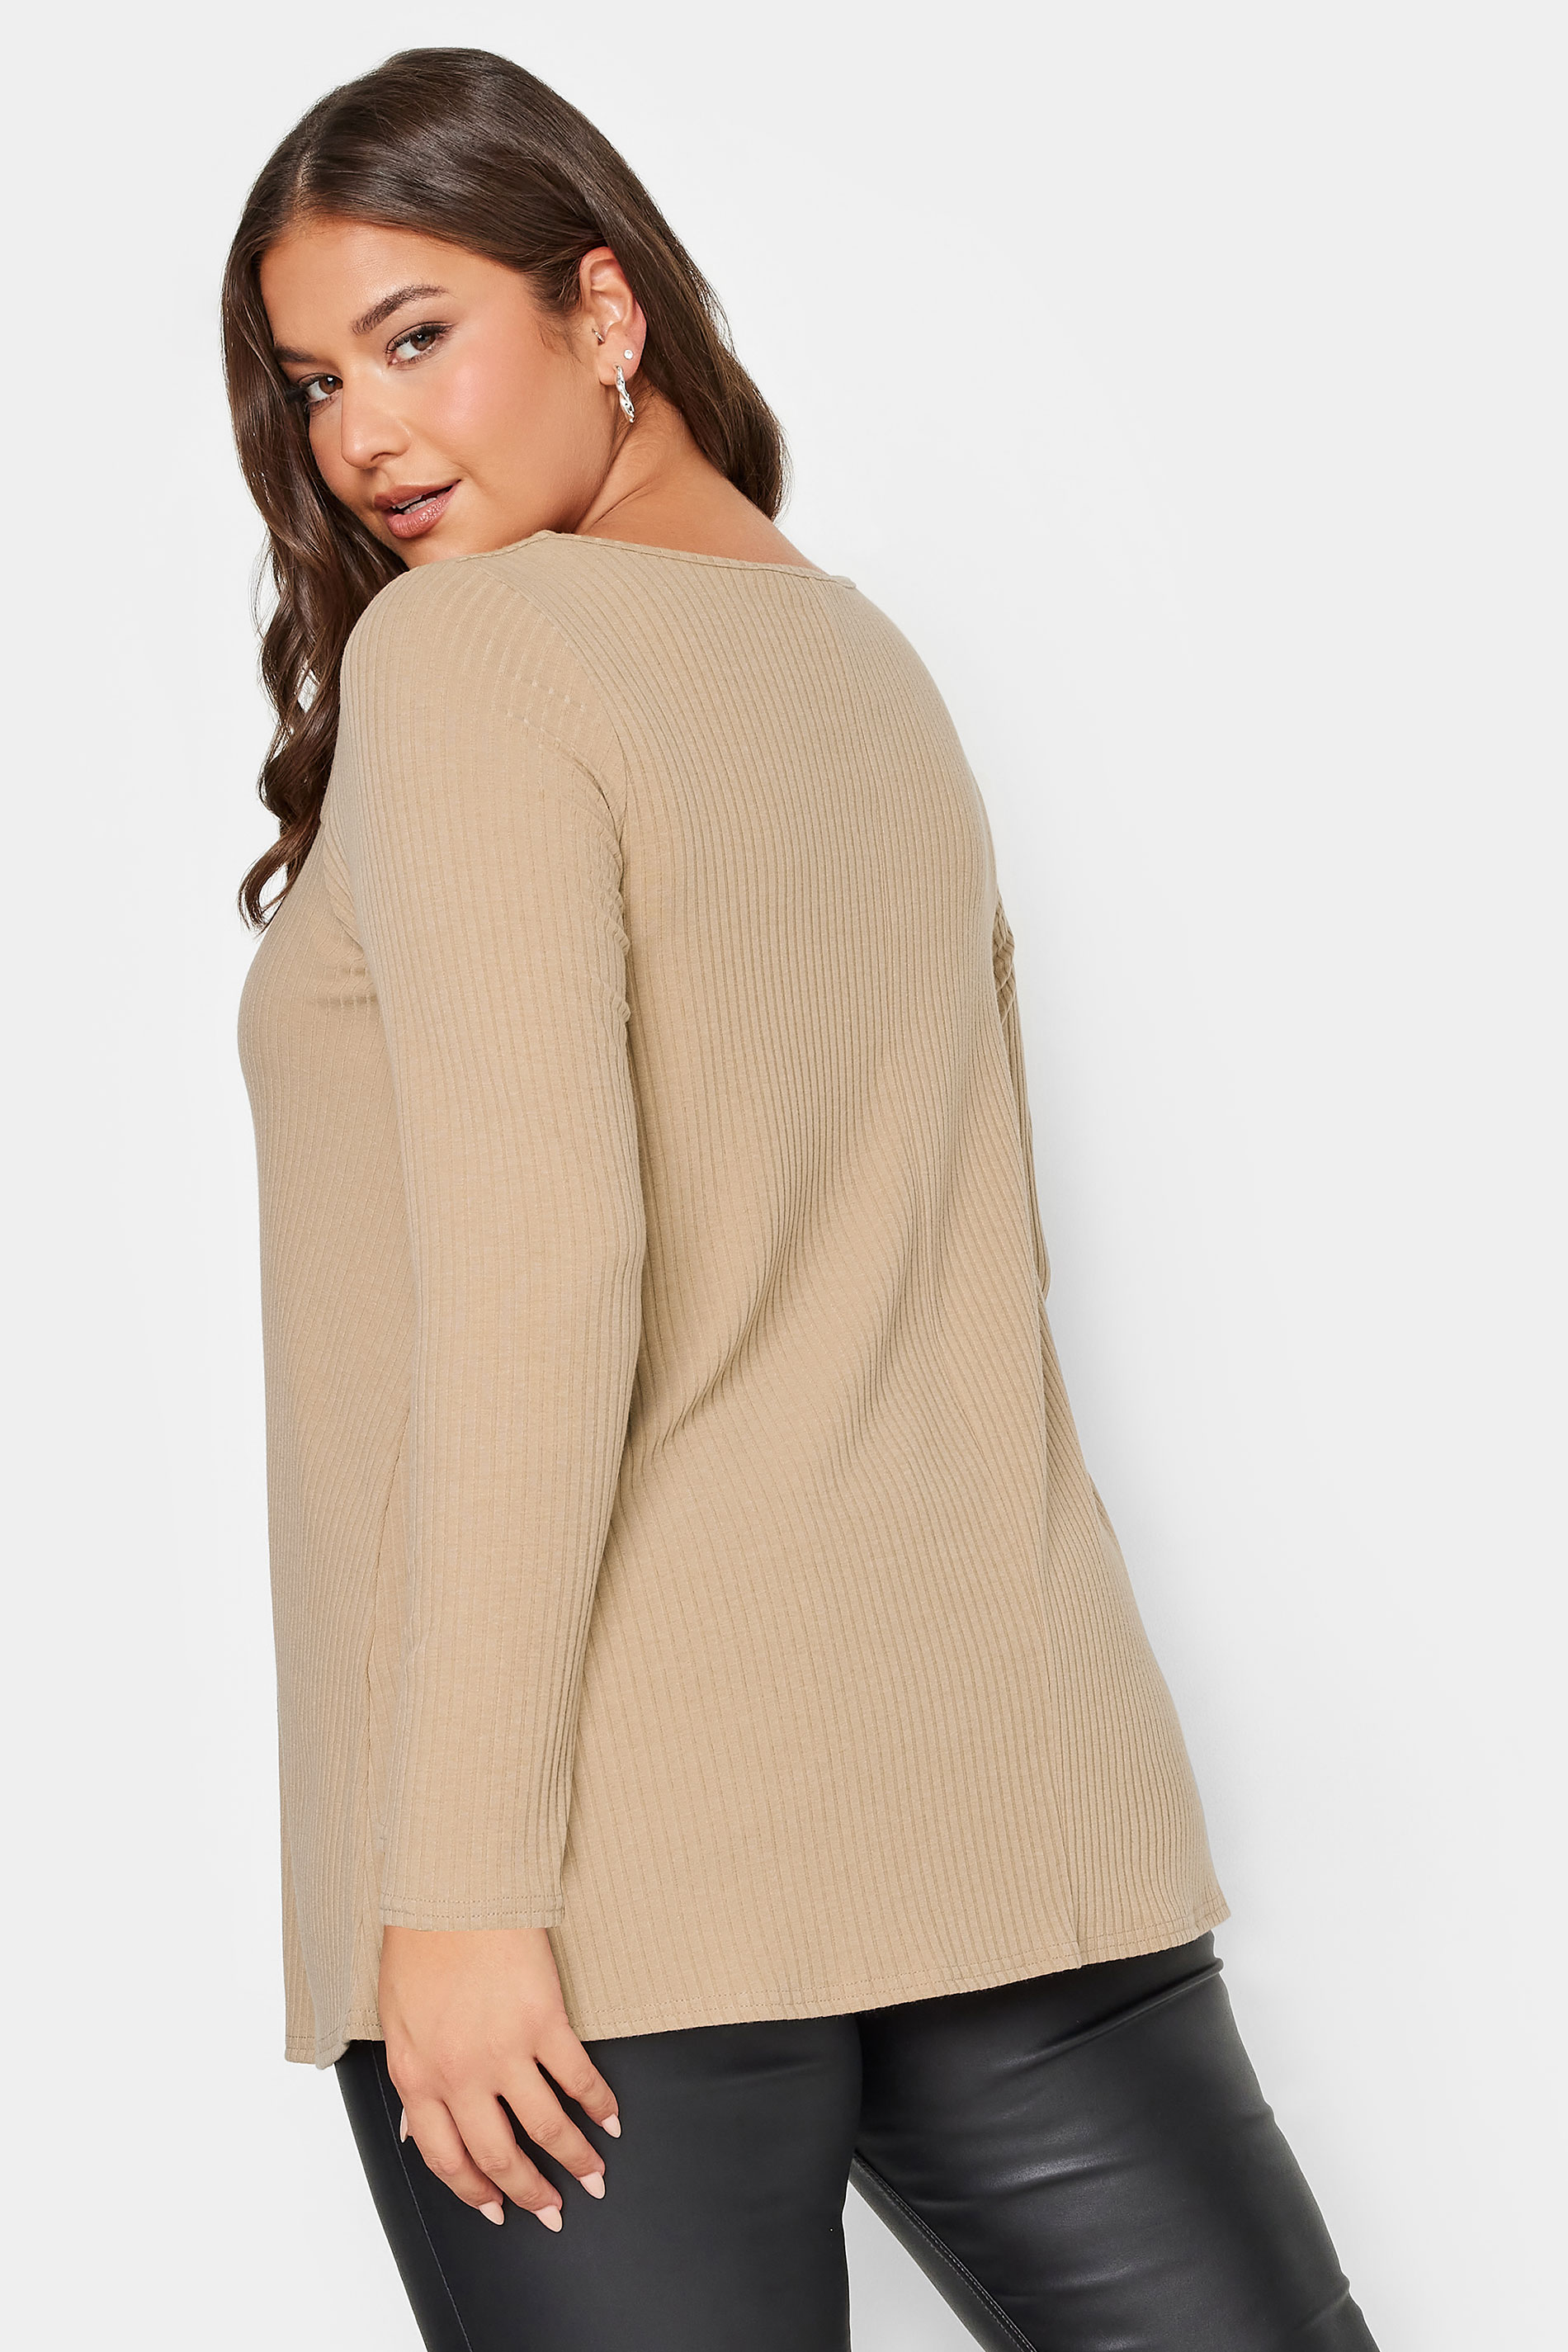 YOURS Plus Size Beige Brown Twisted Front Ribbed Top | Yours Clothing 3